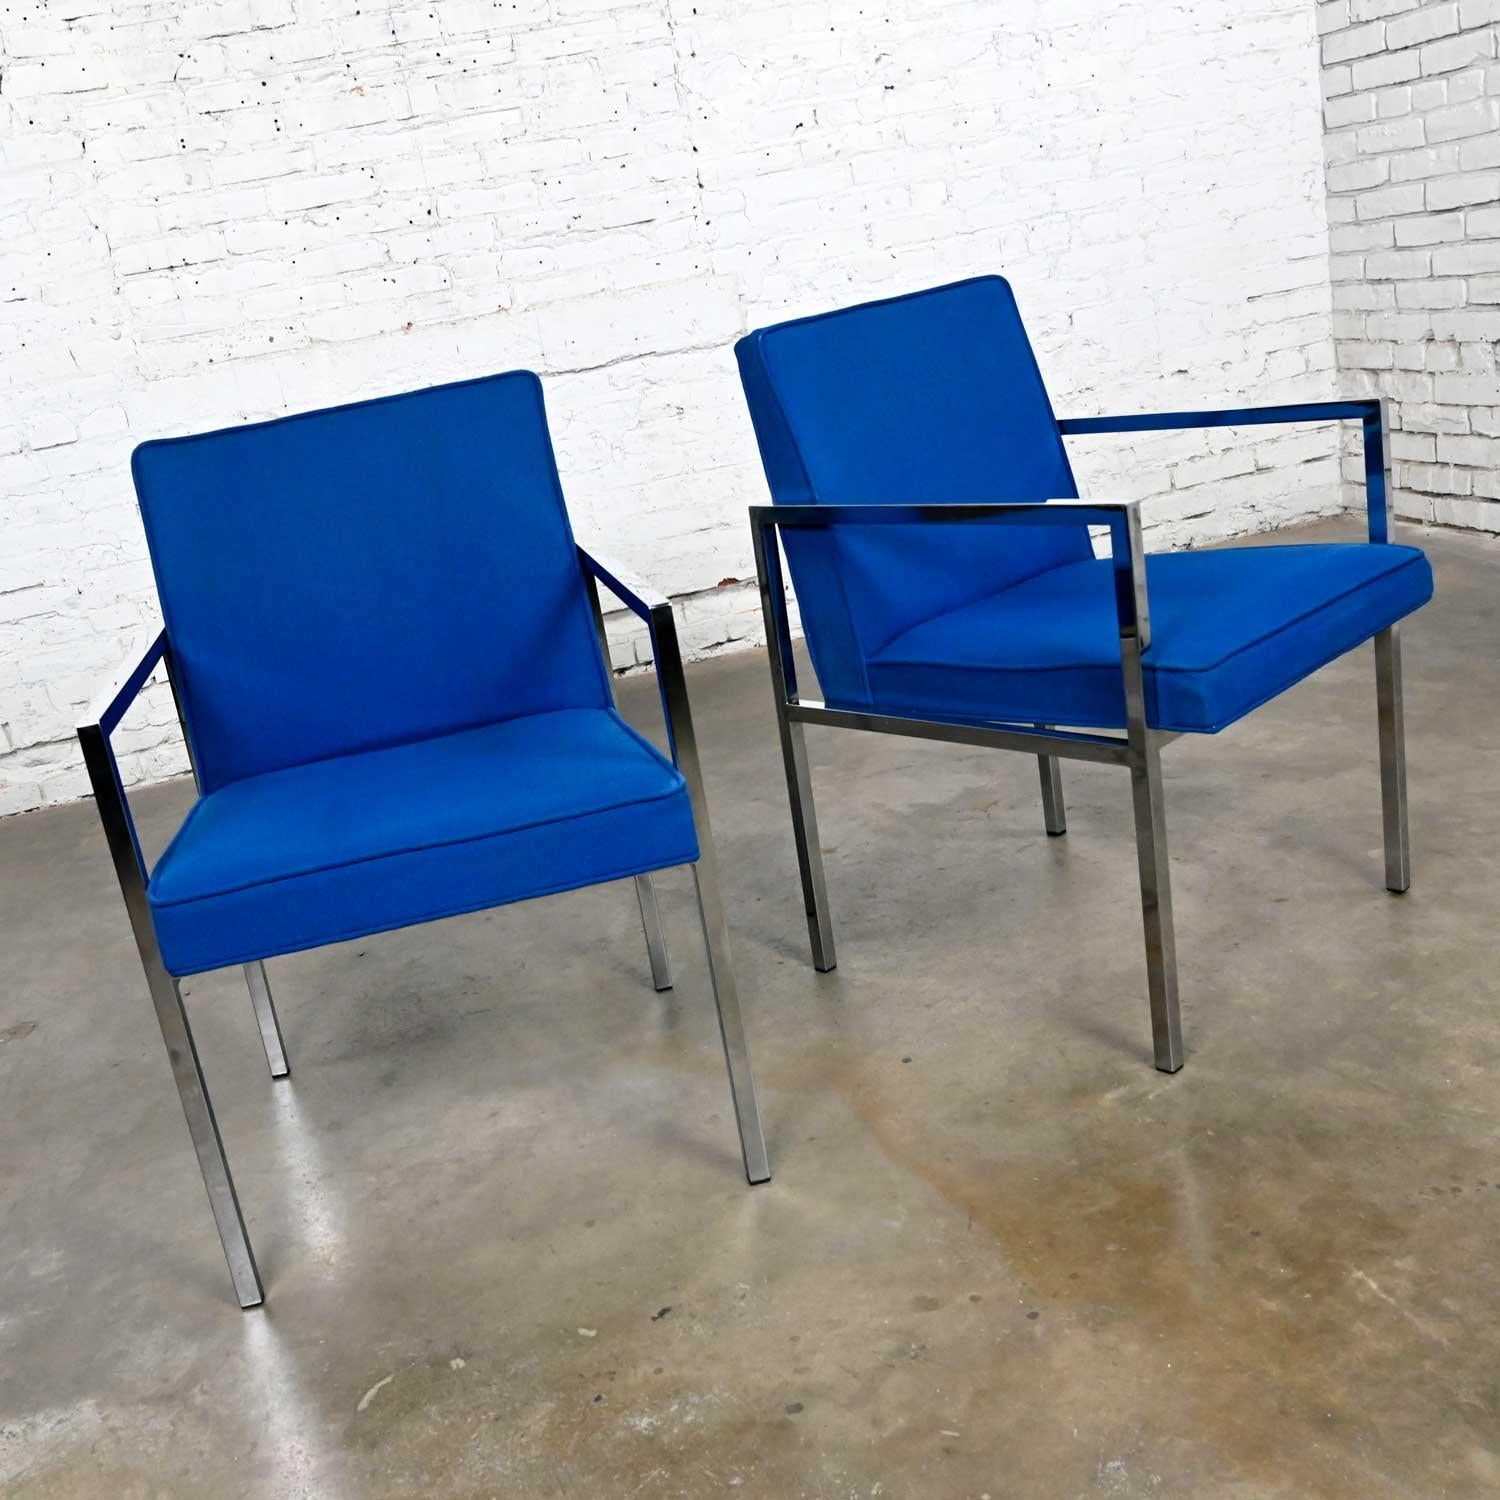 Stunning pair of vintage Mid-Century Modern royal blue and chrome armchairs by Hibriten Chair Company. Beautiful condition, keeping in mind that these are vintage and not new so will have signs of use and wear. The chrome has no pitting that we have